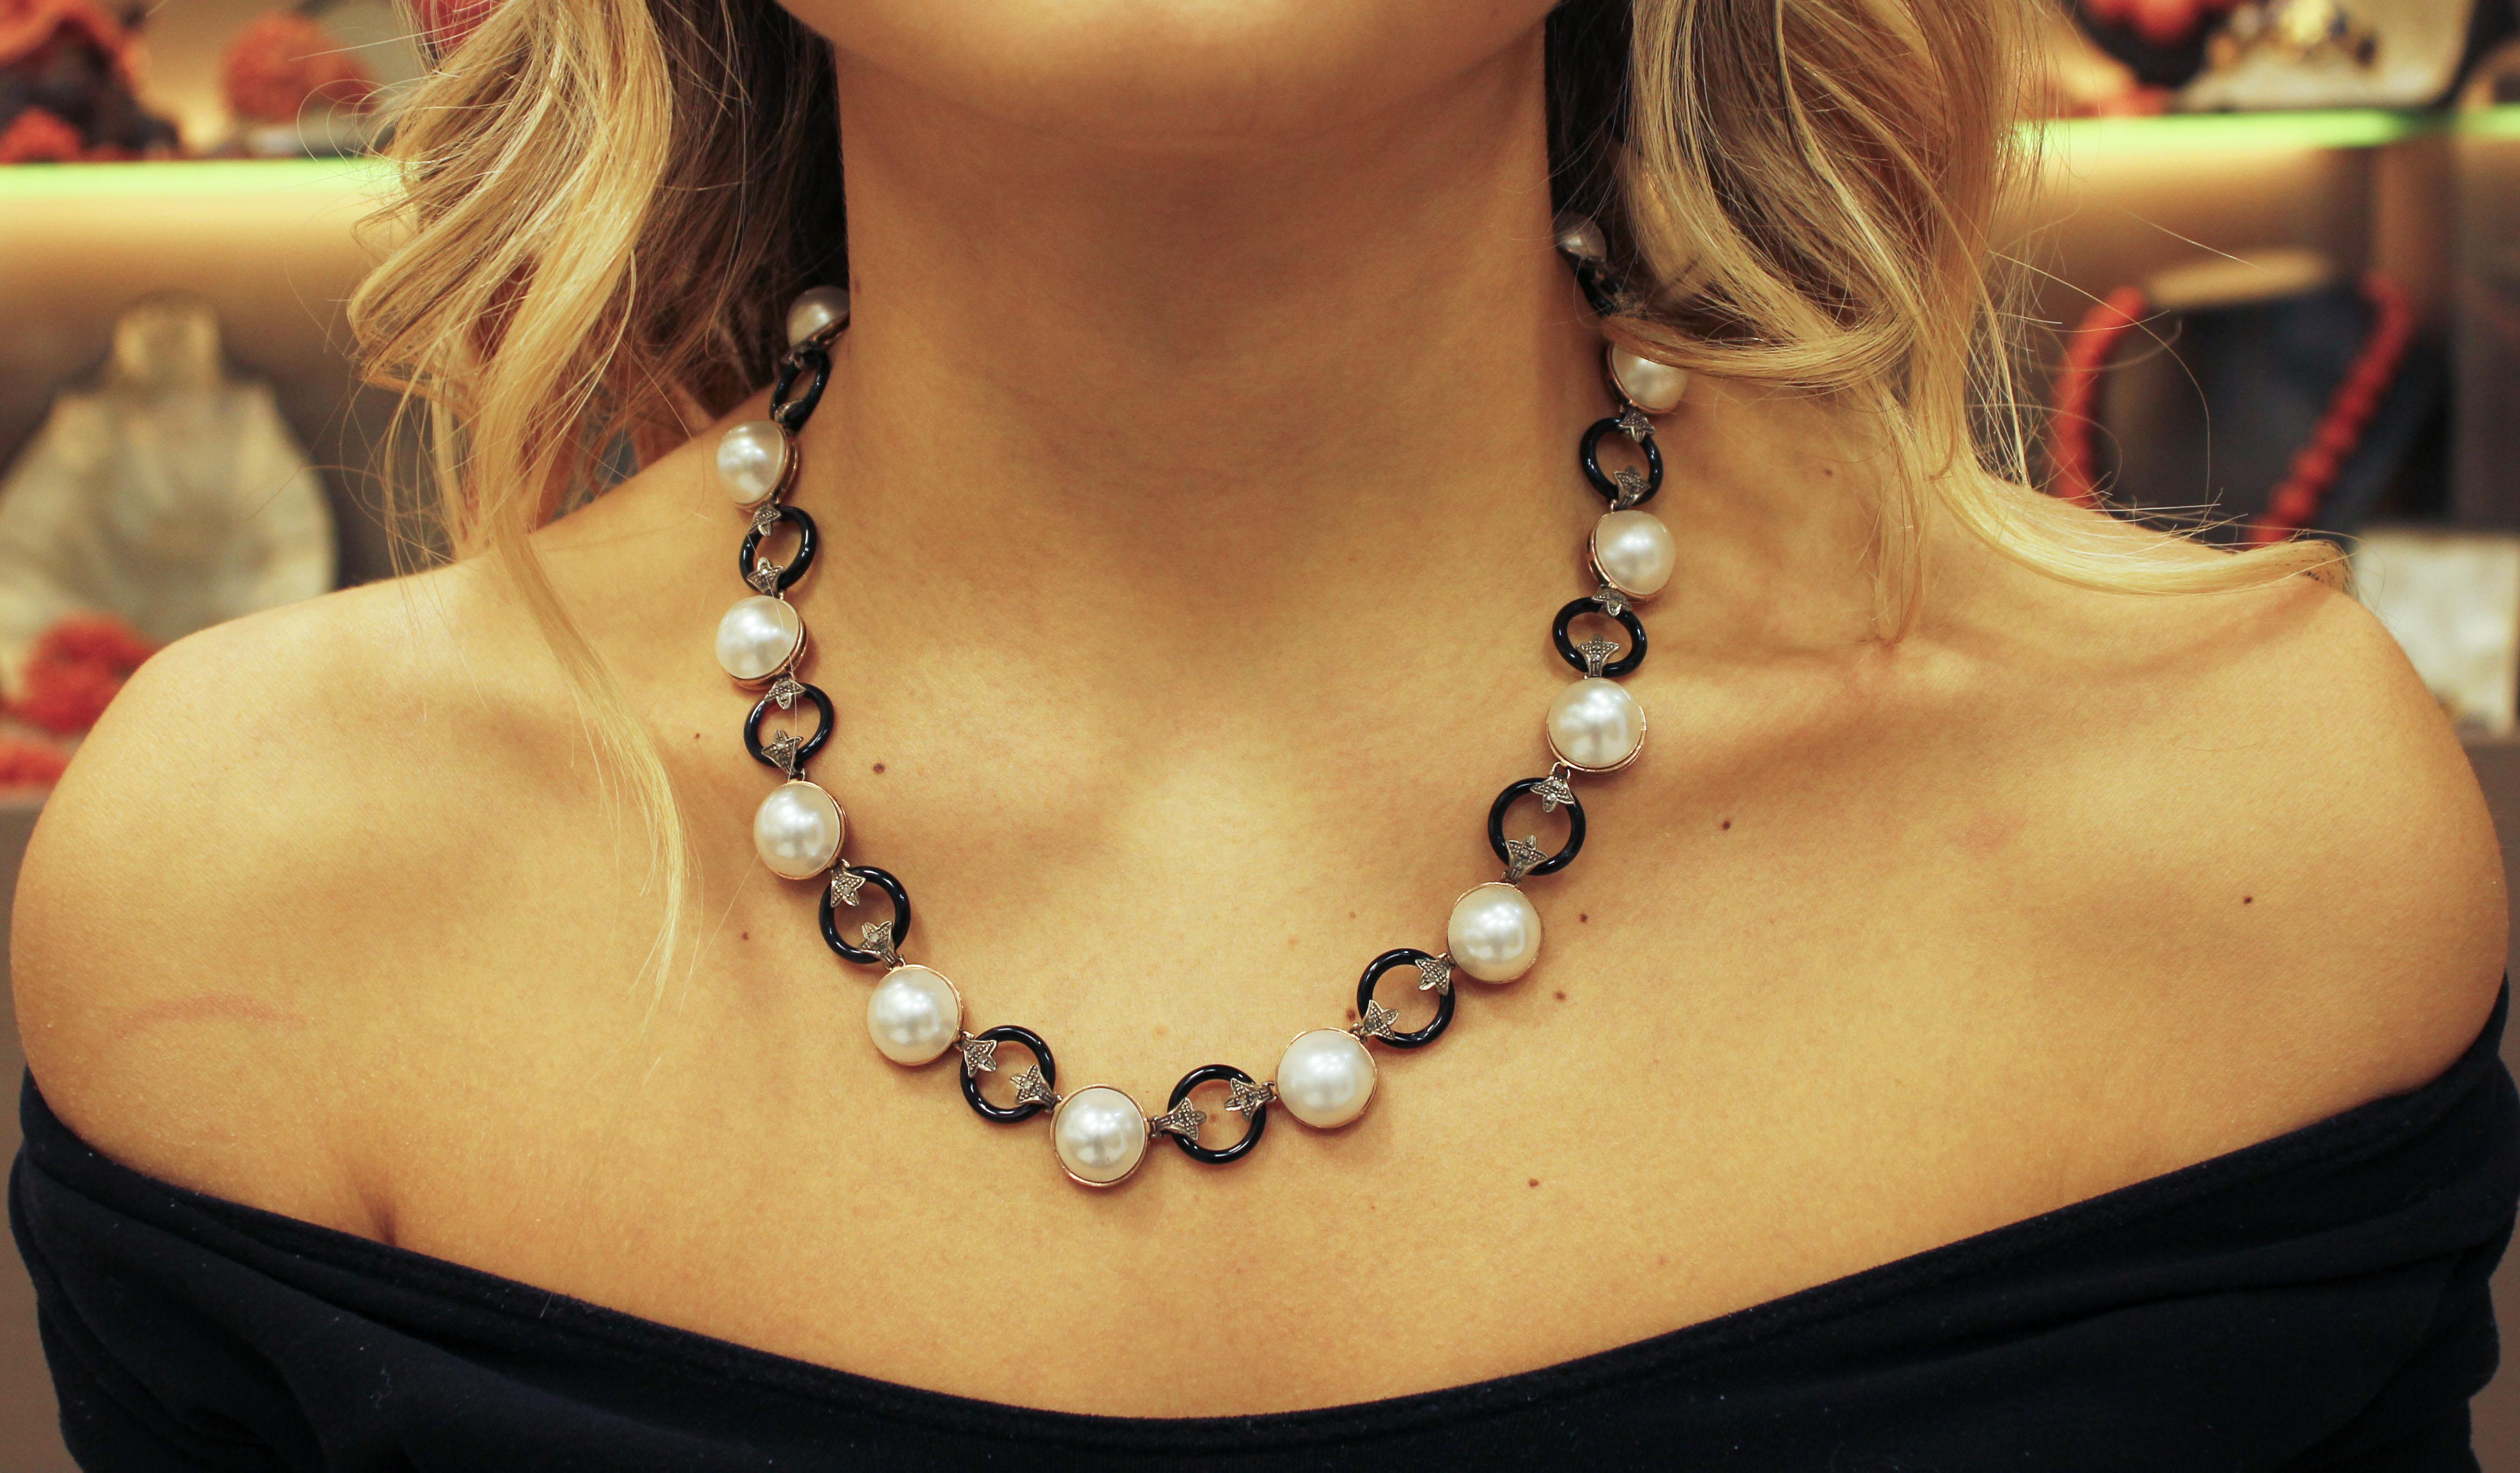 Women's 0.56 Carat Diamonds, 6 G Onyx Rings, 17.4 G Pearls Gold Silver Link Necklace For Sale